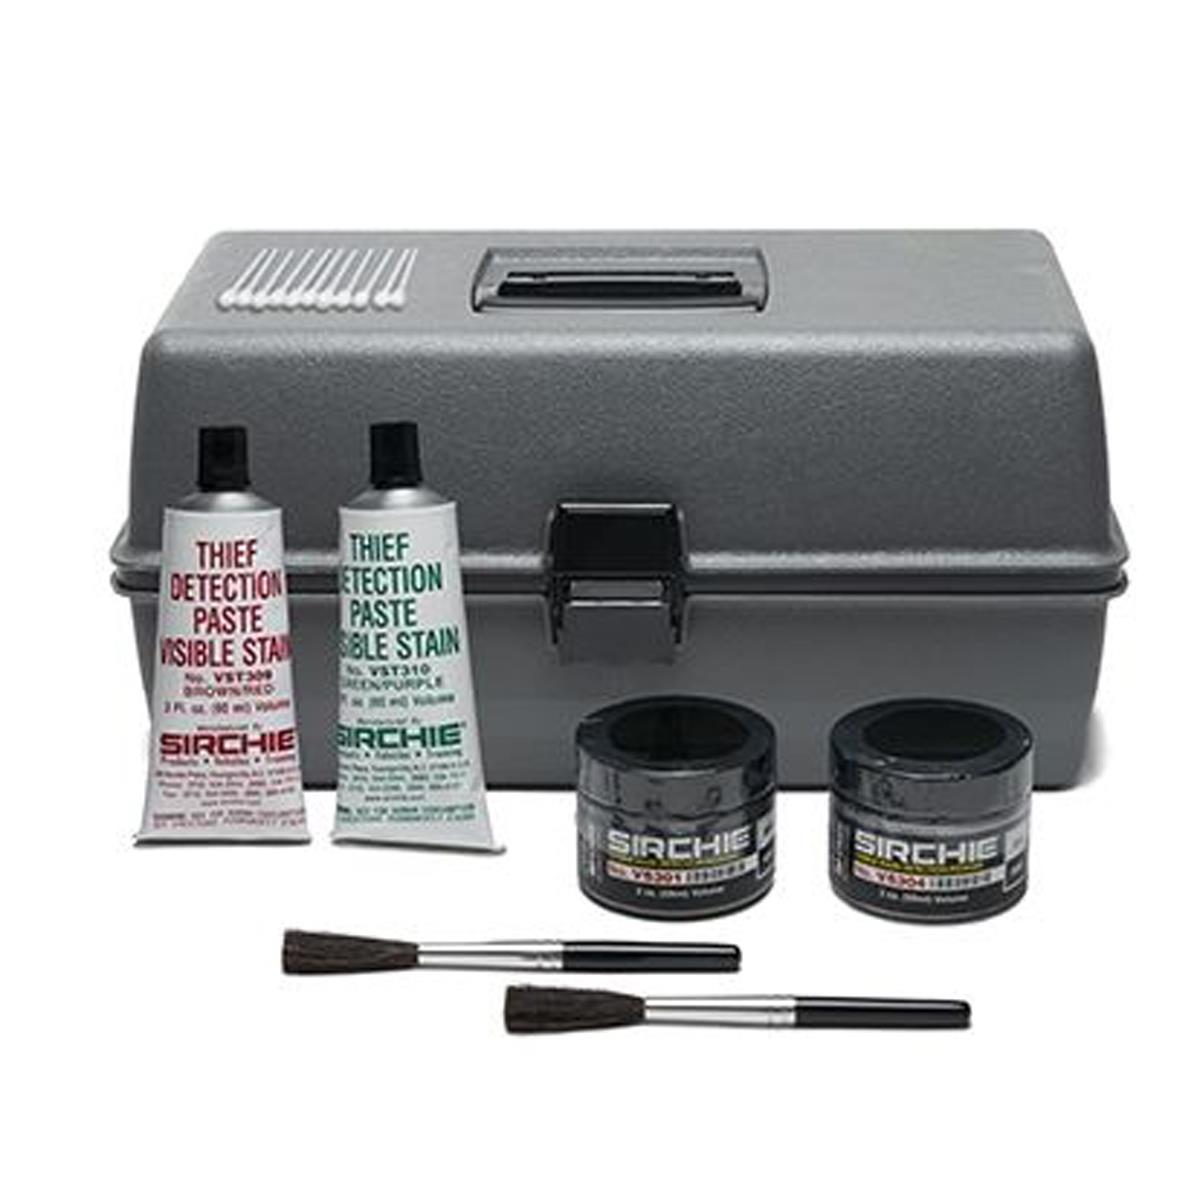 Image of Sirchie Regular Visible Stain Detection Kit